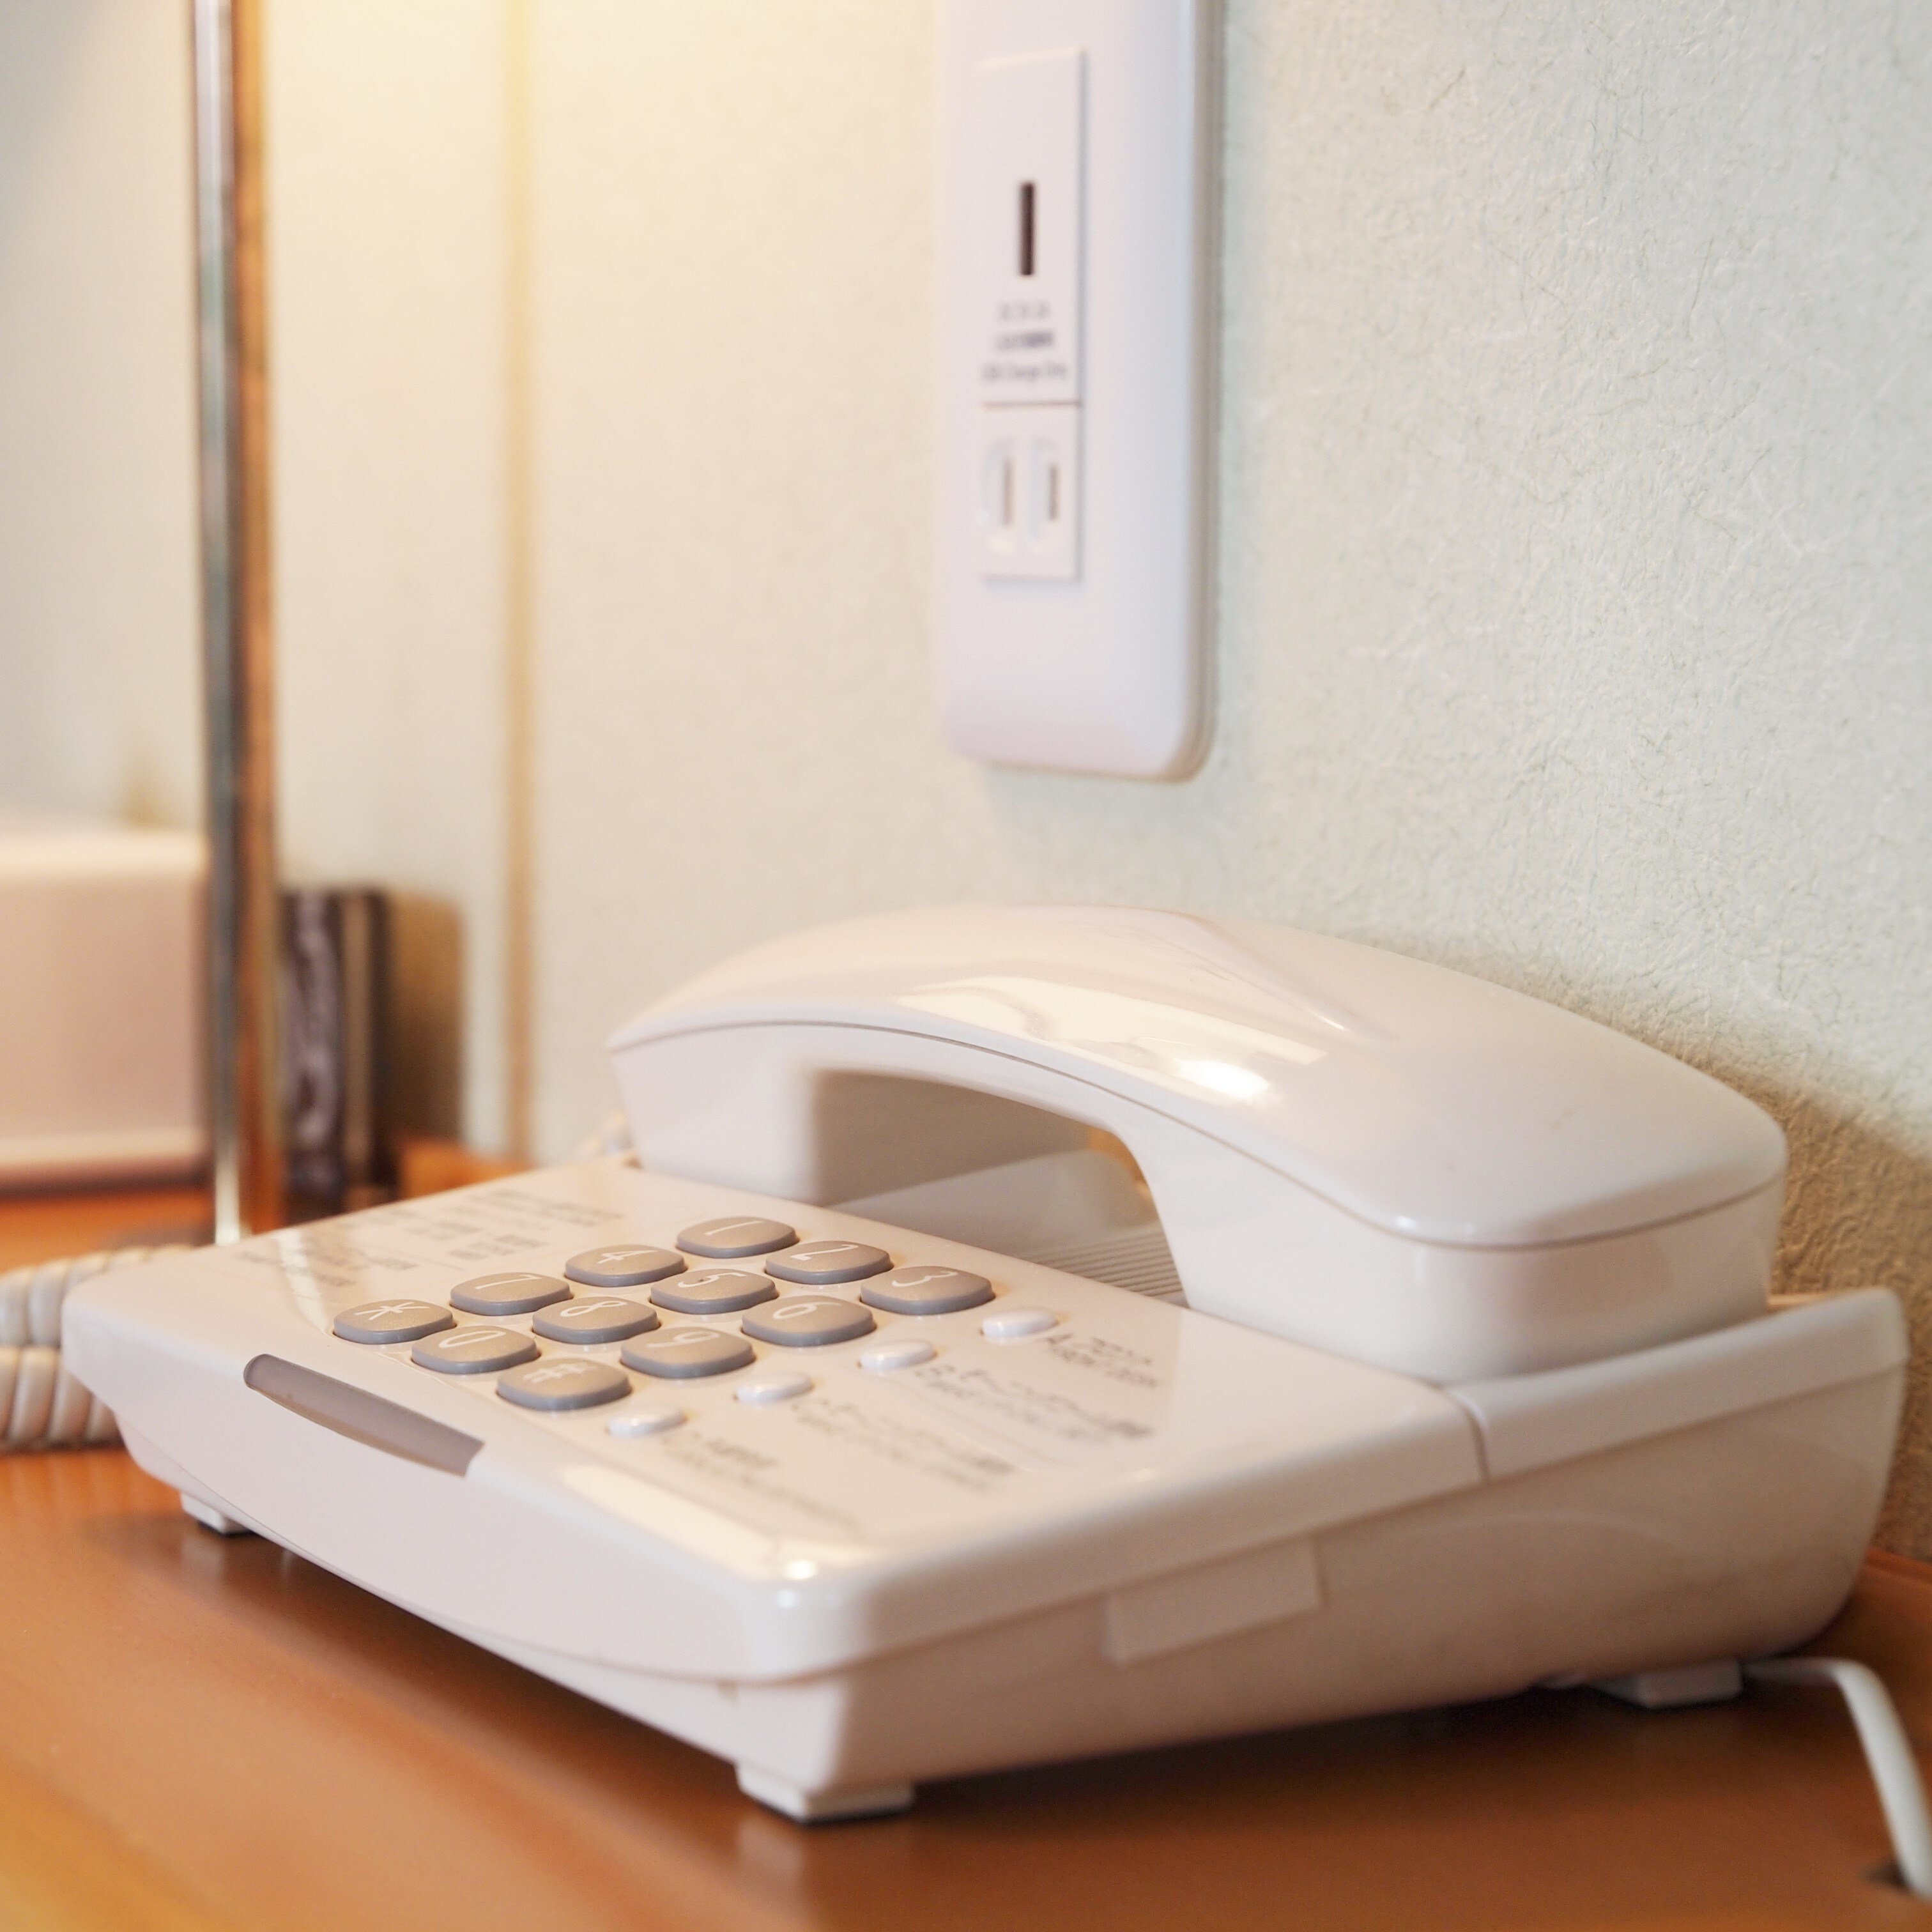 [Guest room] Guest room extension phone